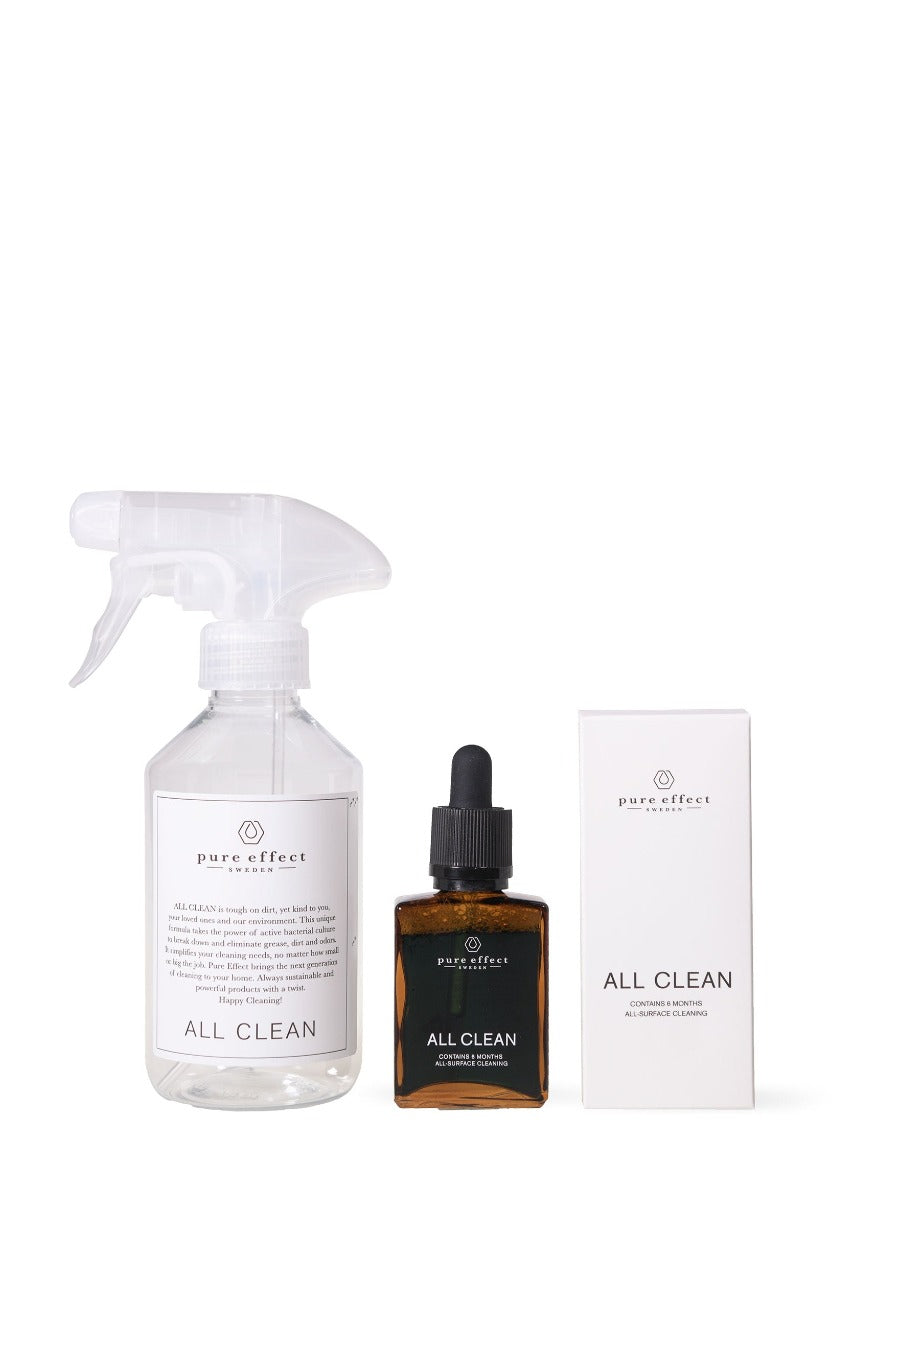 Pure effect all clean - start kit.